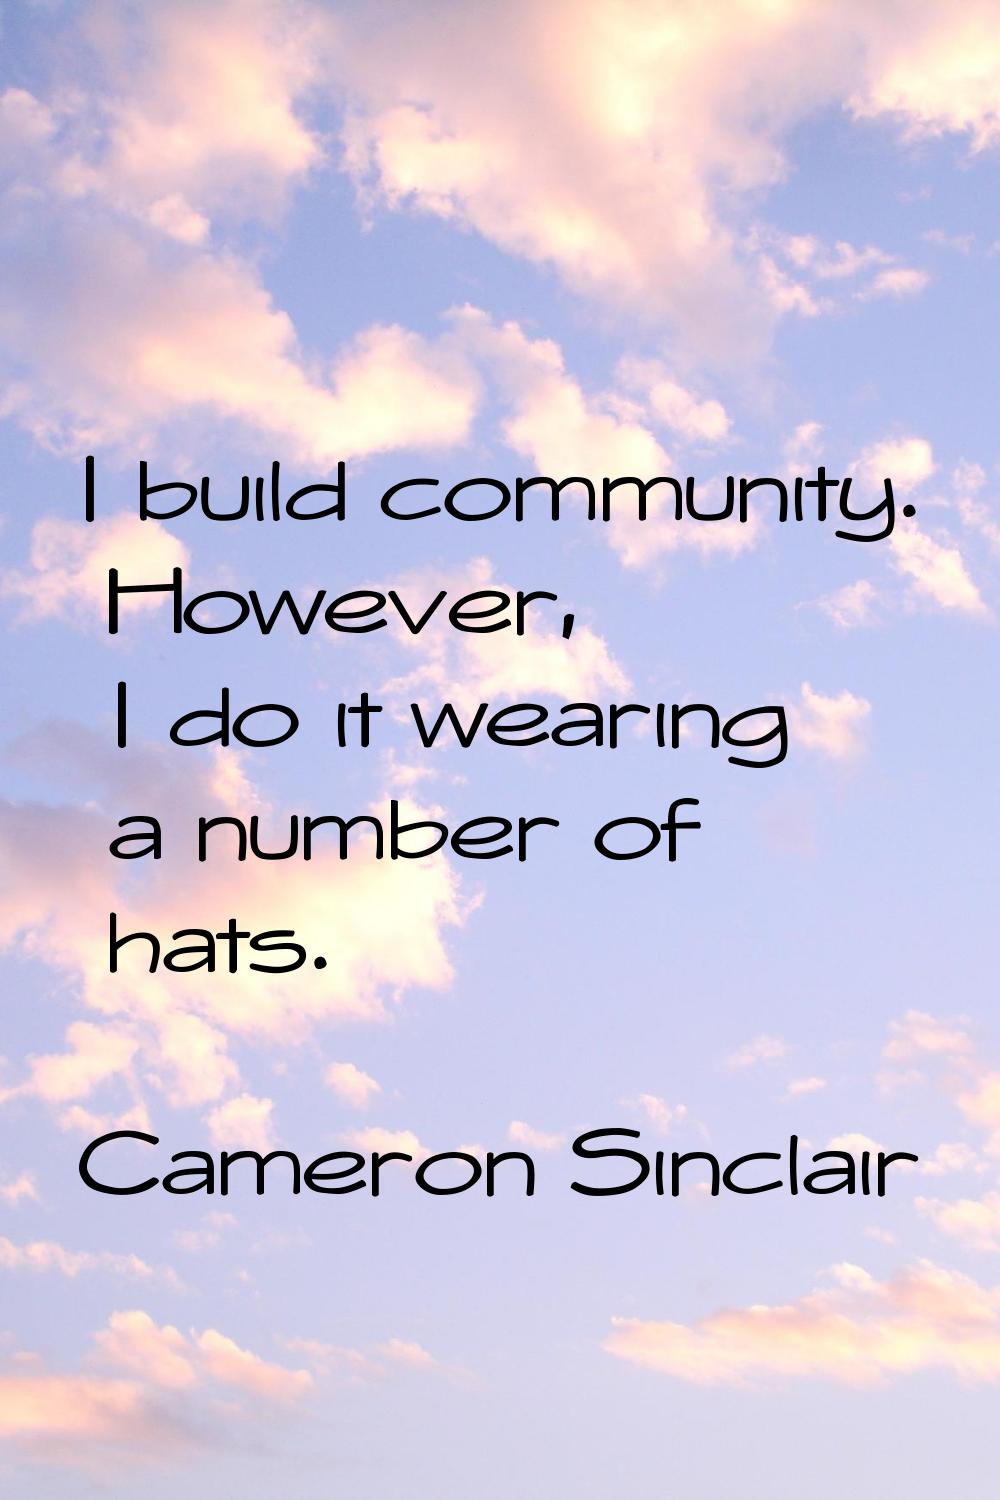 I build community. However, I do it wearing a number of hats.